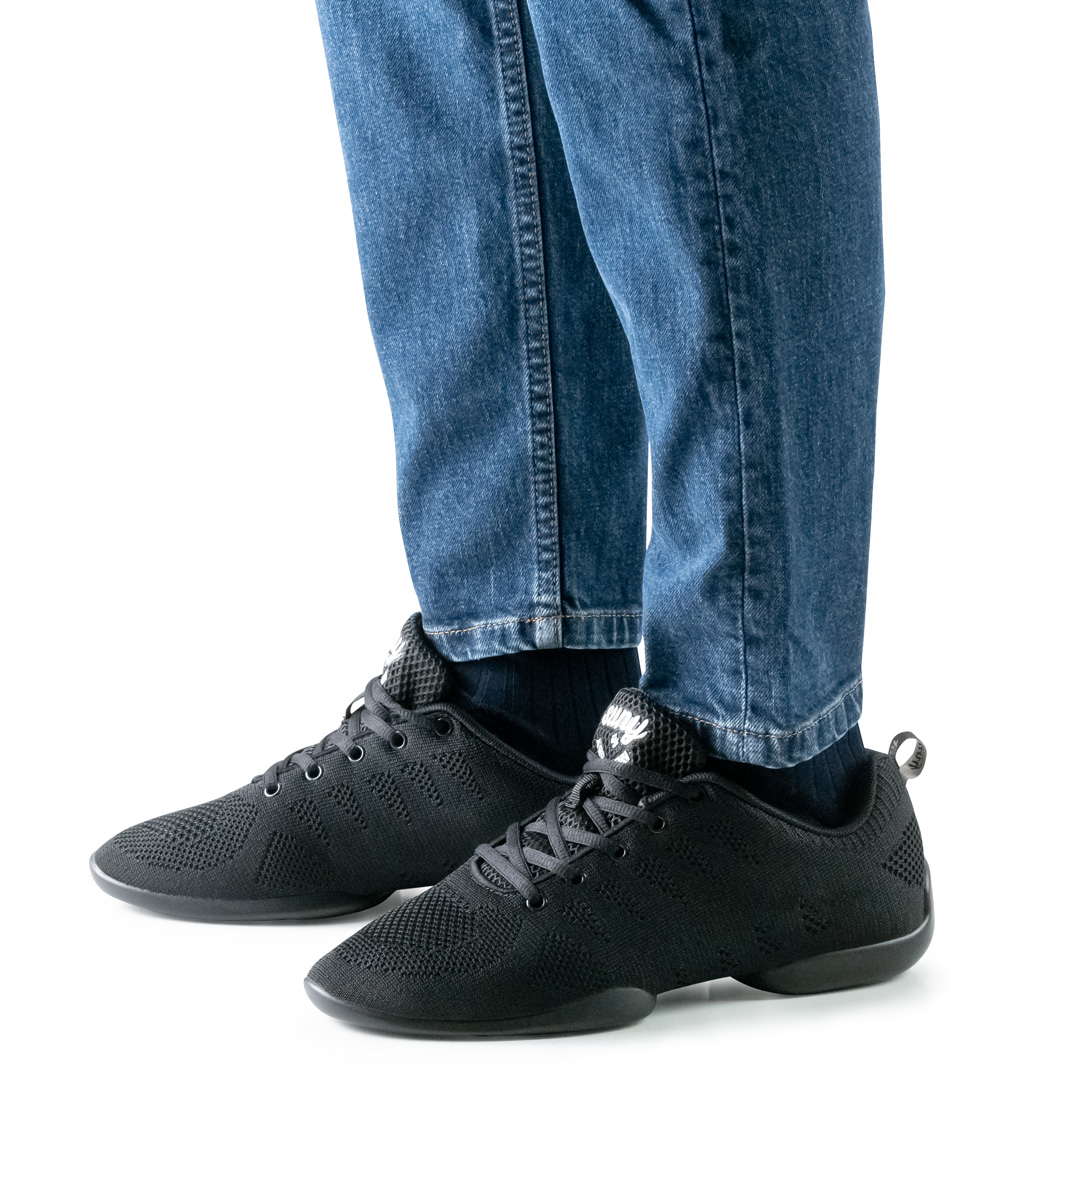 Blue jeans in combination with black men's dance sneaker from Suny